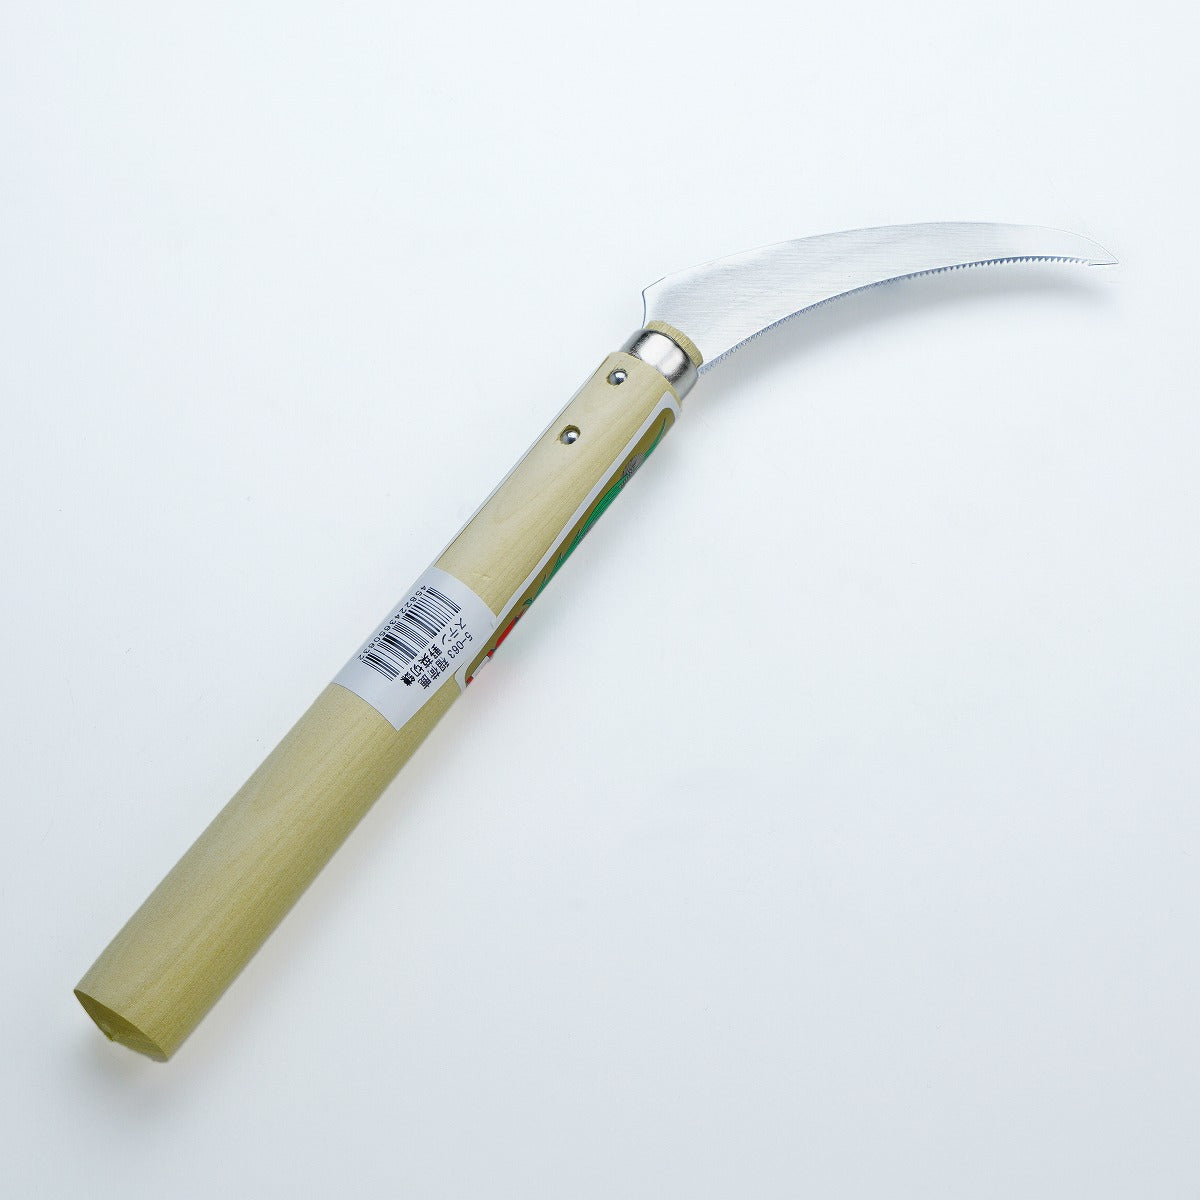 Leaf Vegetable Sickle made from Stainless Steel, Blade Length 110mm(abt 4.3")